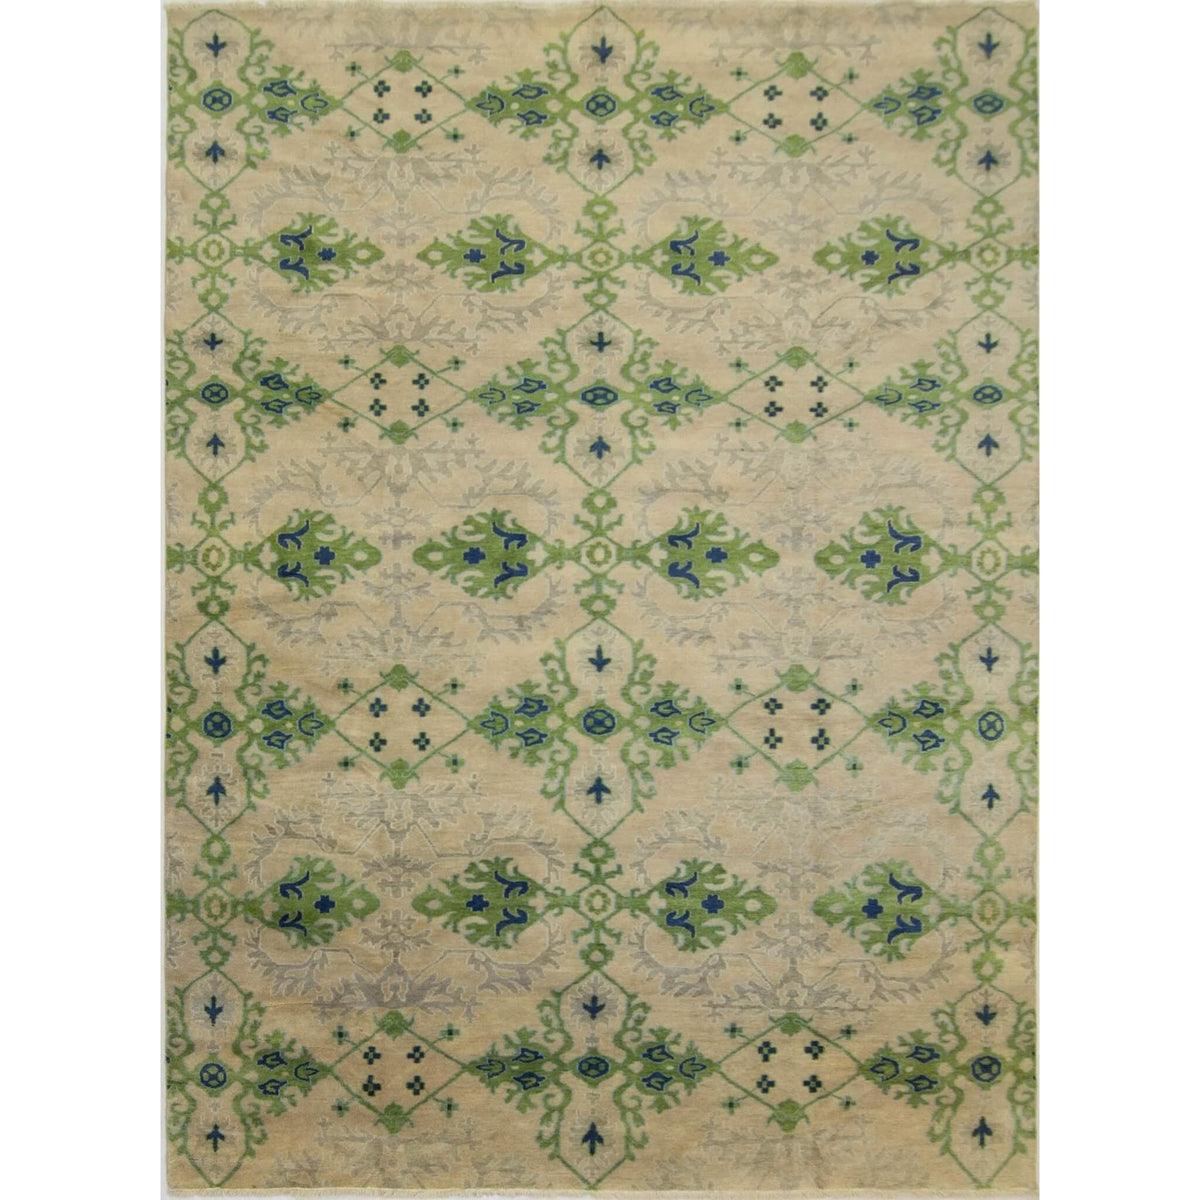 Hand-knotted Wool Kothan Rug 265cm x 375cm